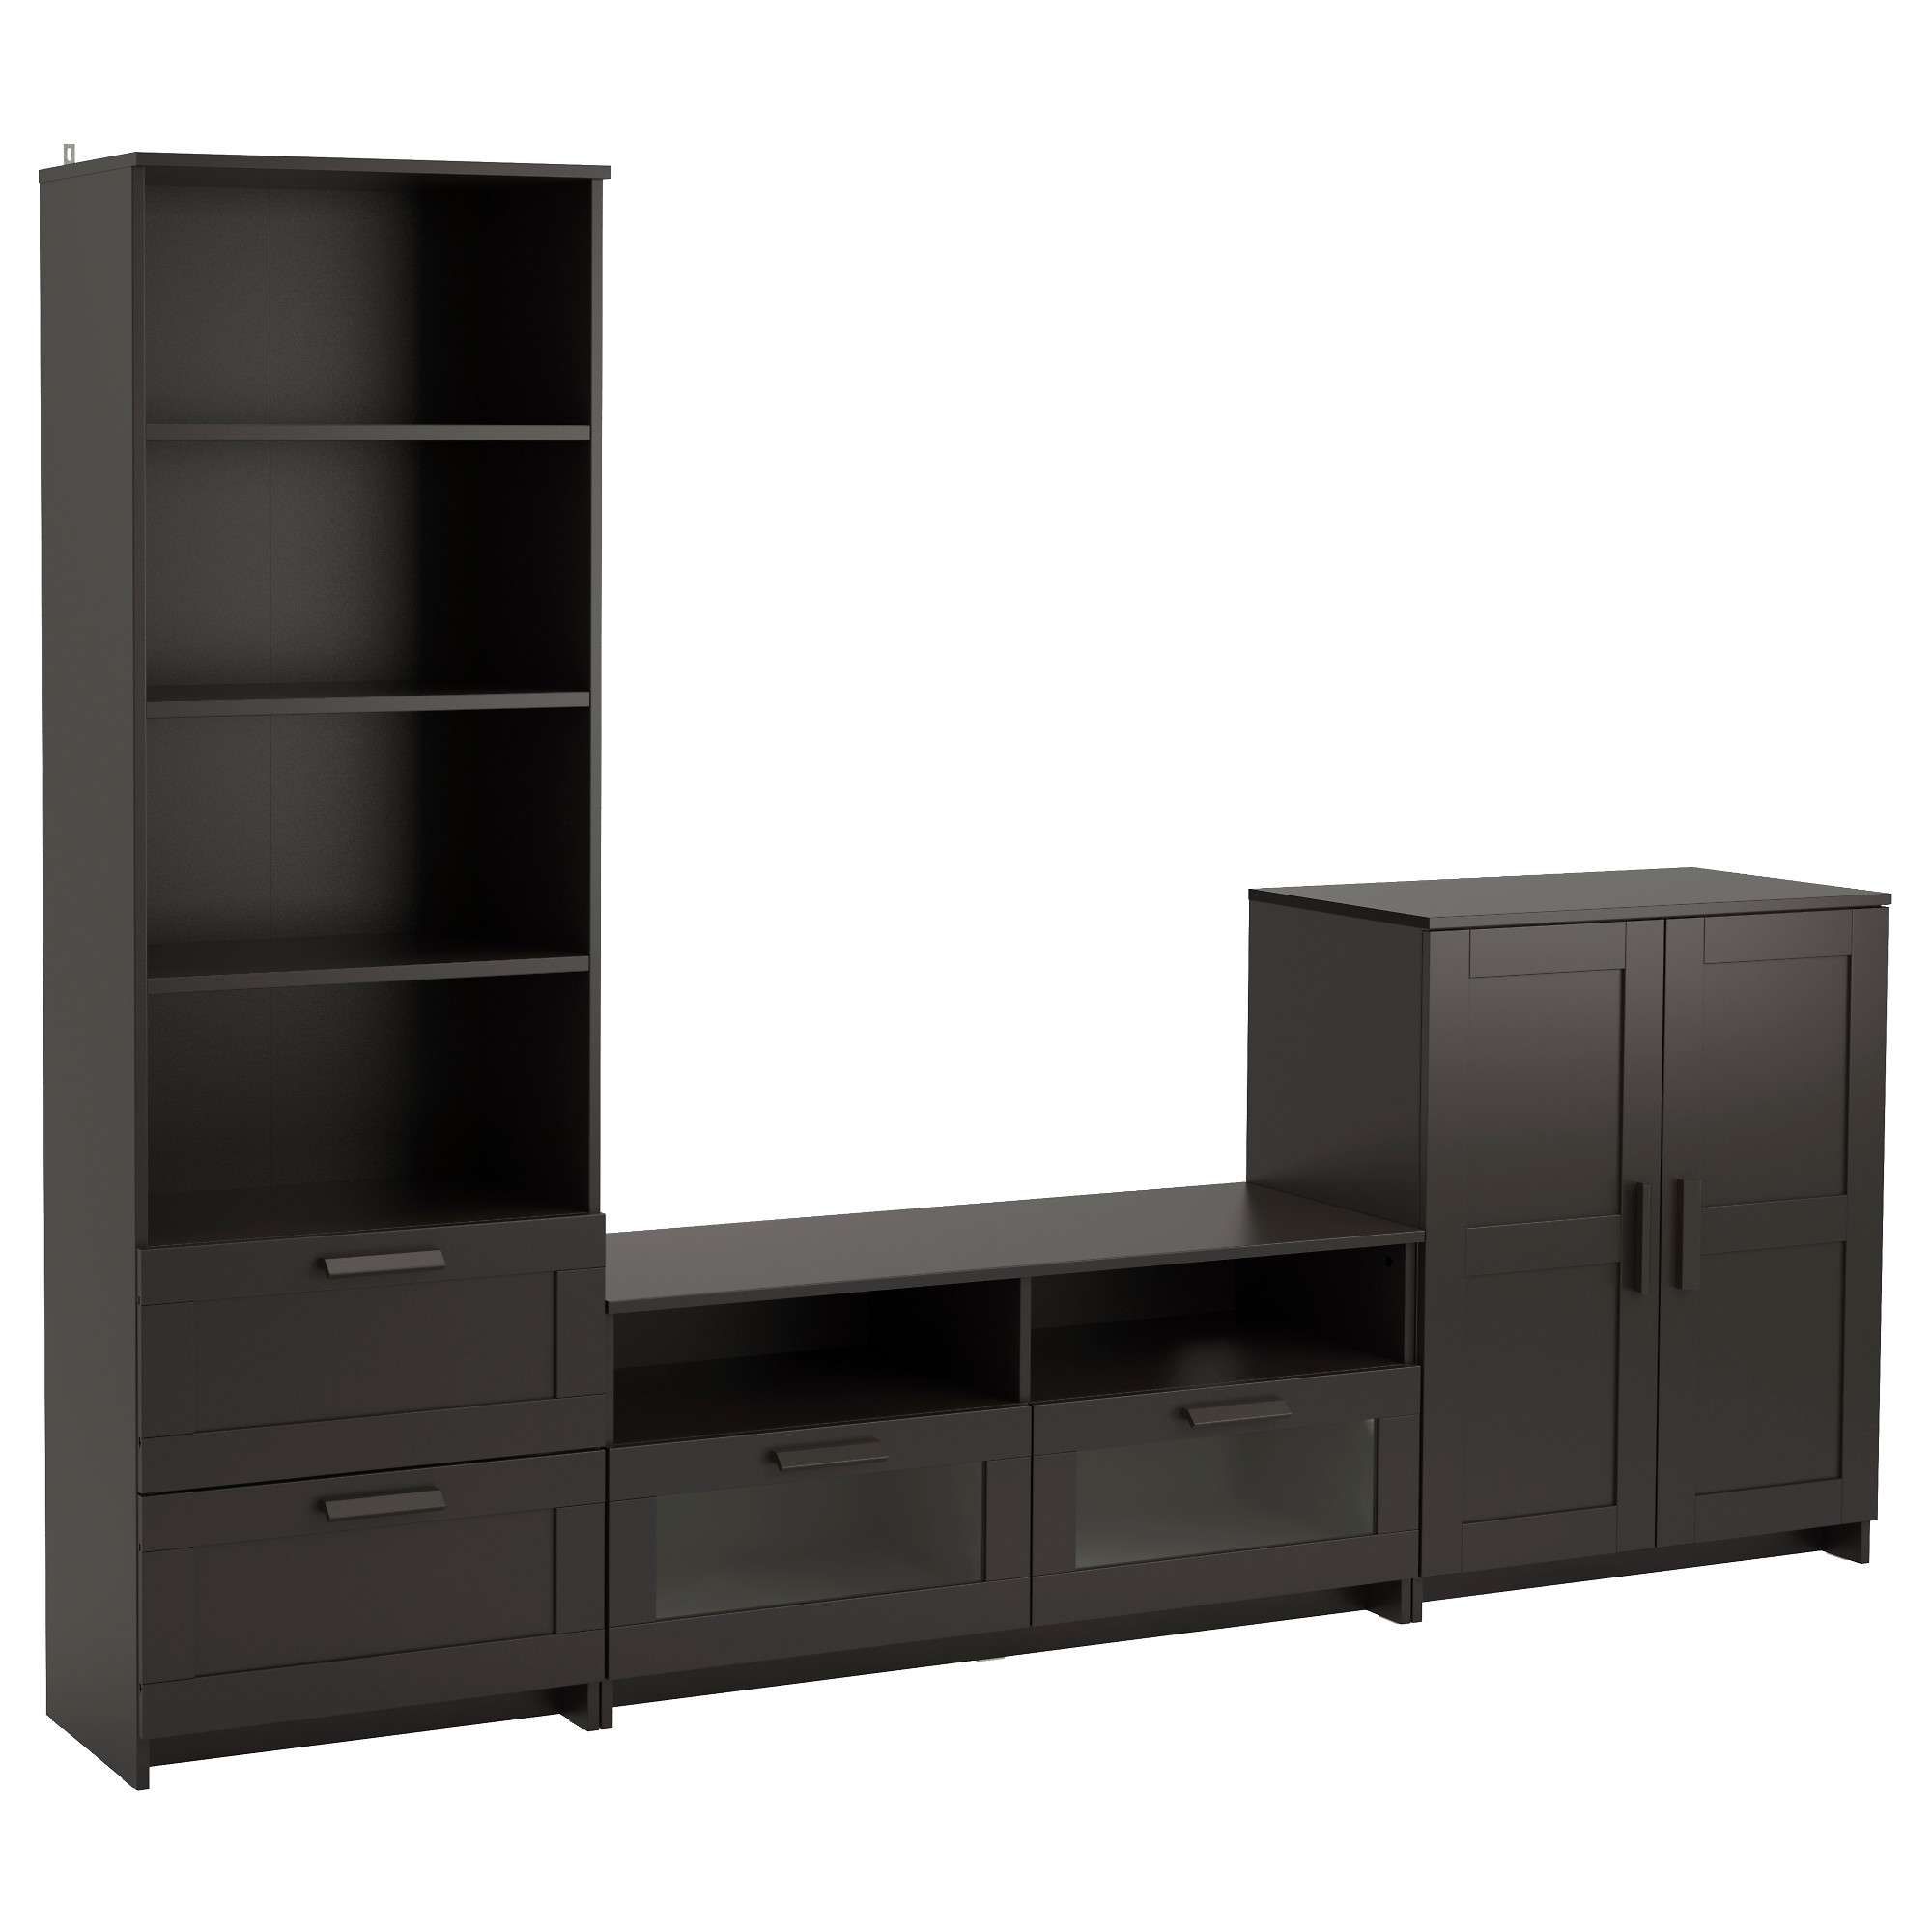 Tv Stands & Media Units | Ikea Ireland – Dublin Intended For Baby Proof Contemporary Tv Cabinets (View 2 of 20)